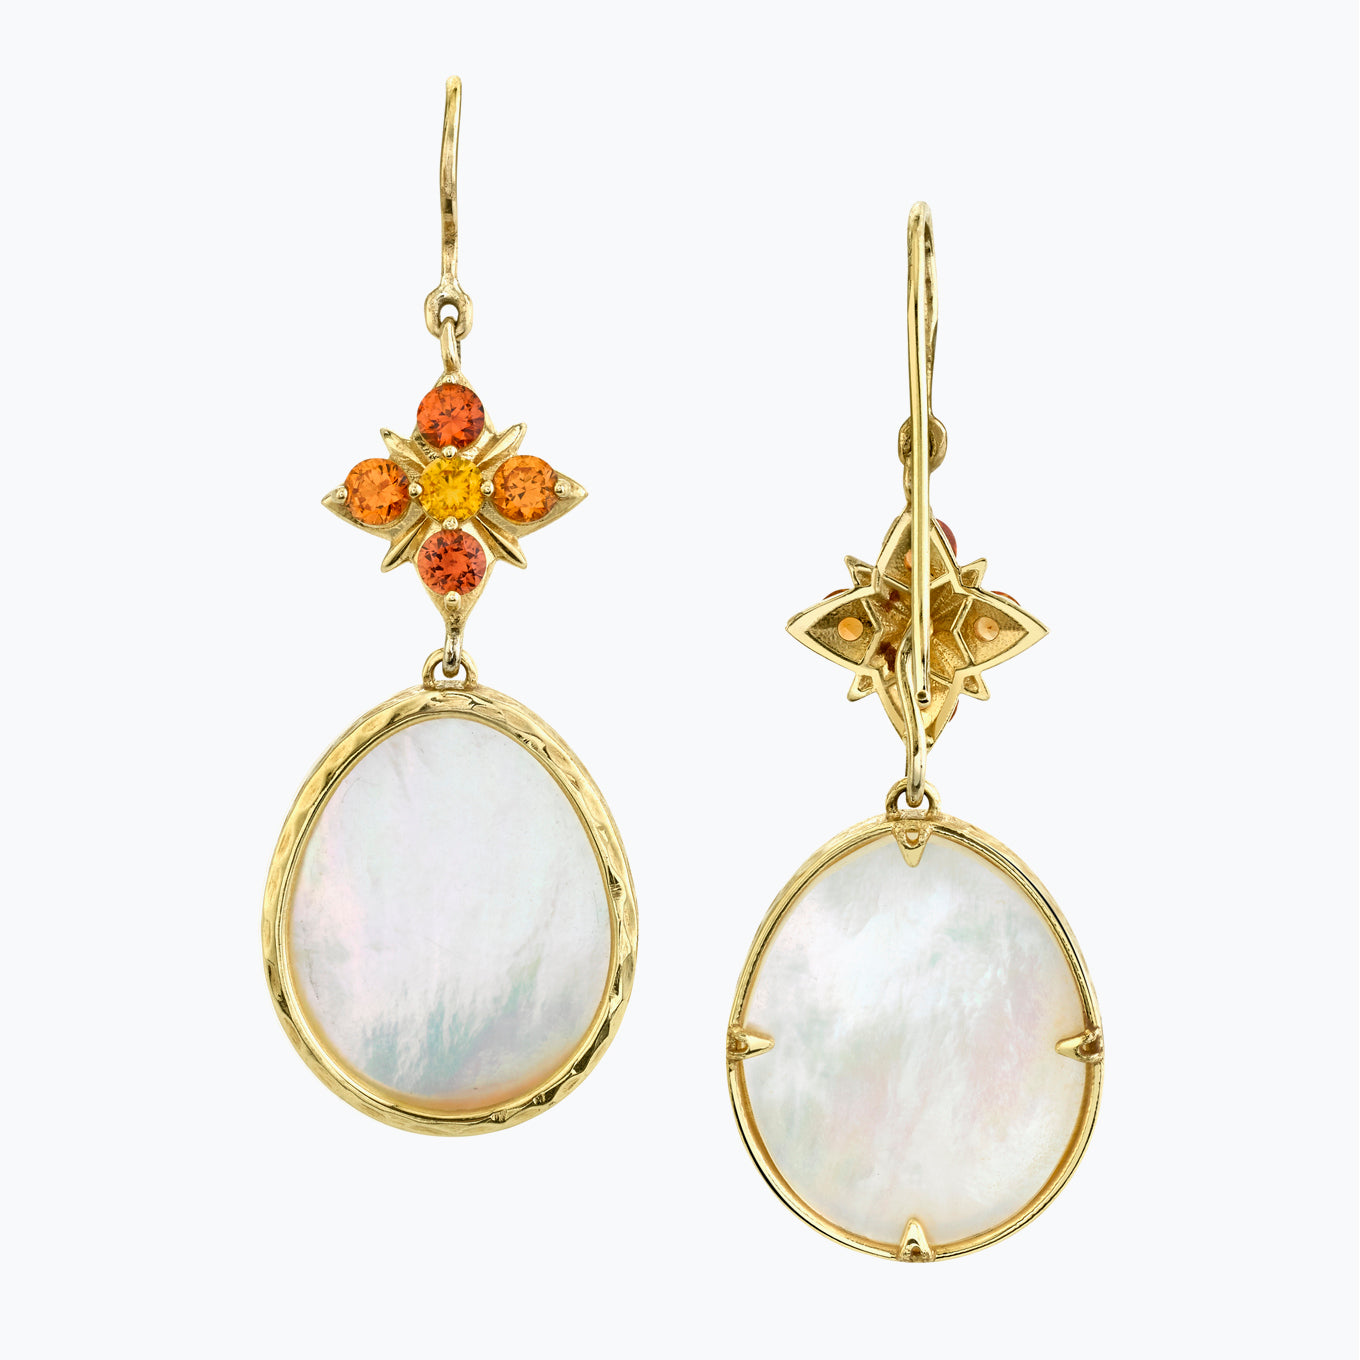 Convertible Sapphire Earrings with Mother of Pearl Drop